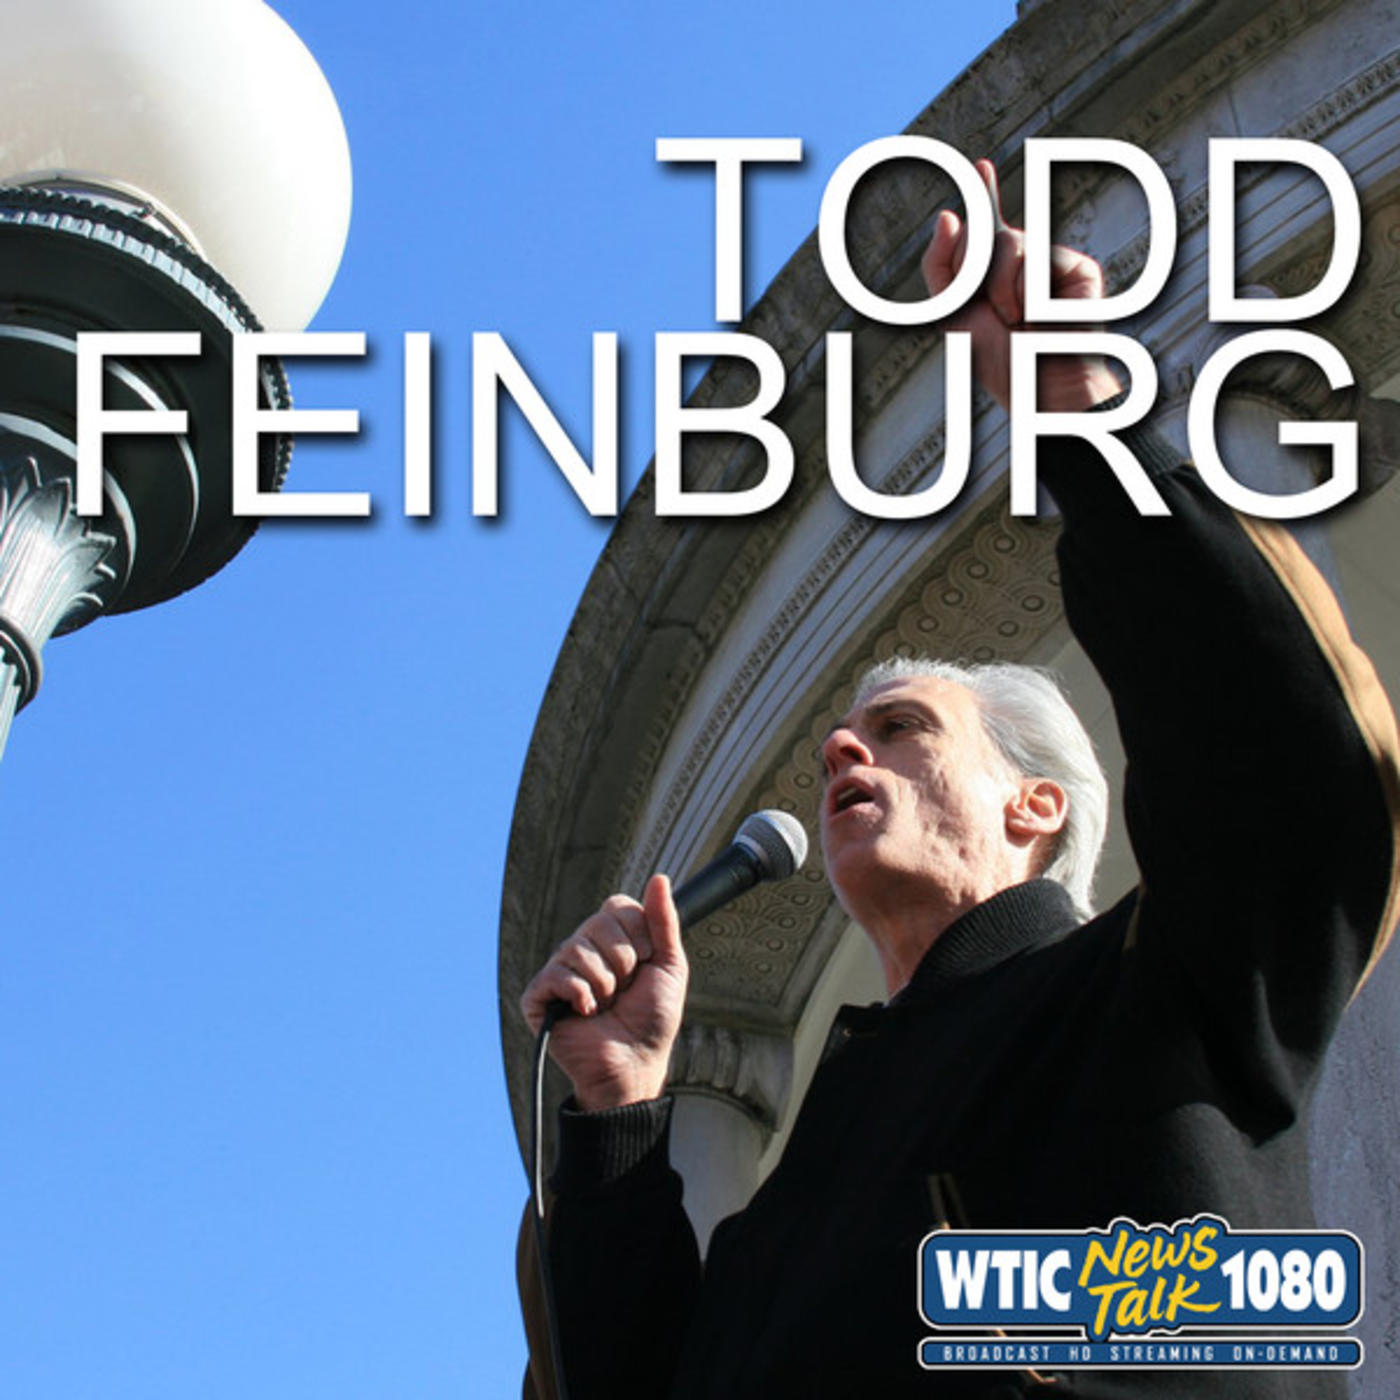 Todd Feinburg: The Liberation of a Nation (04/23/20)